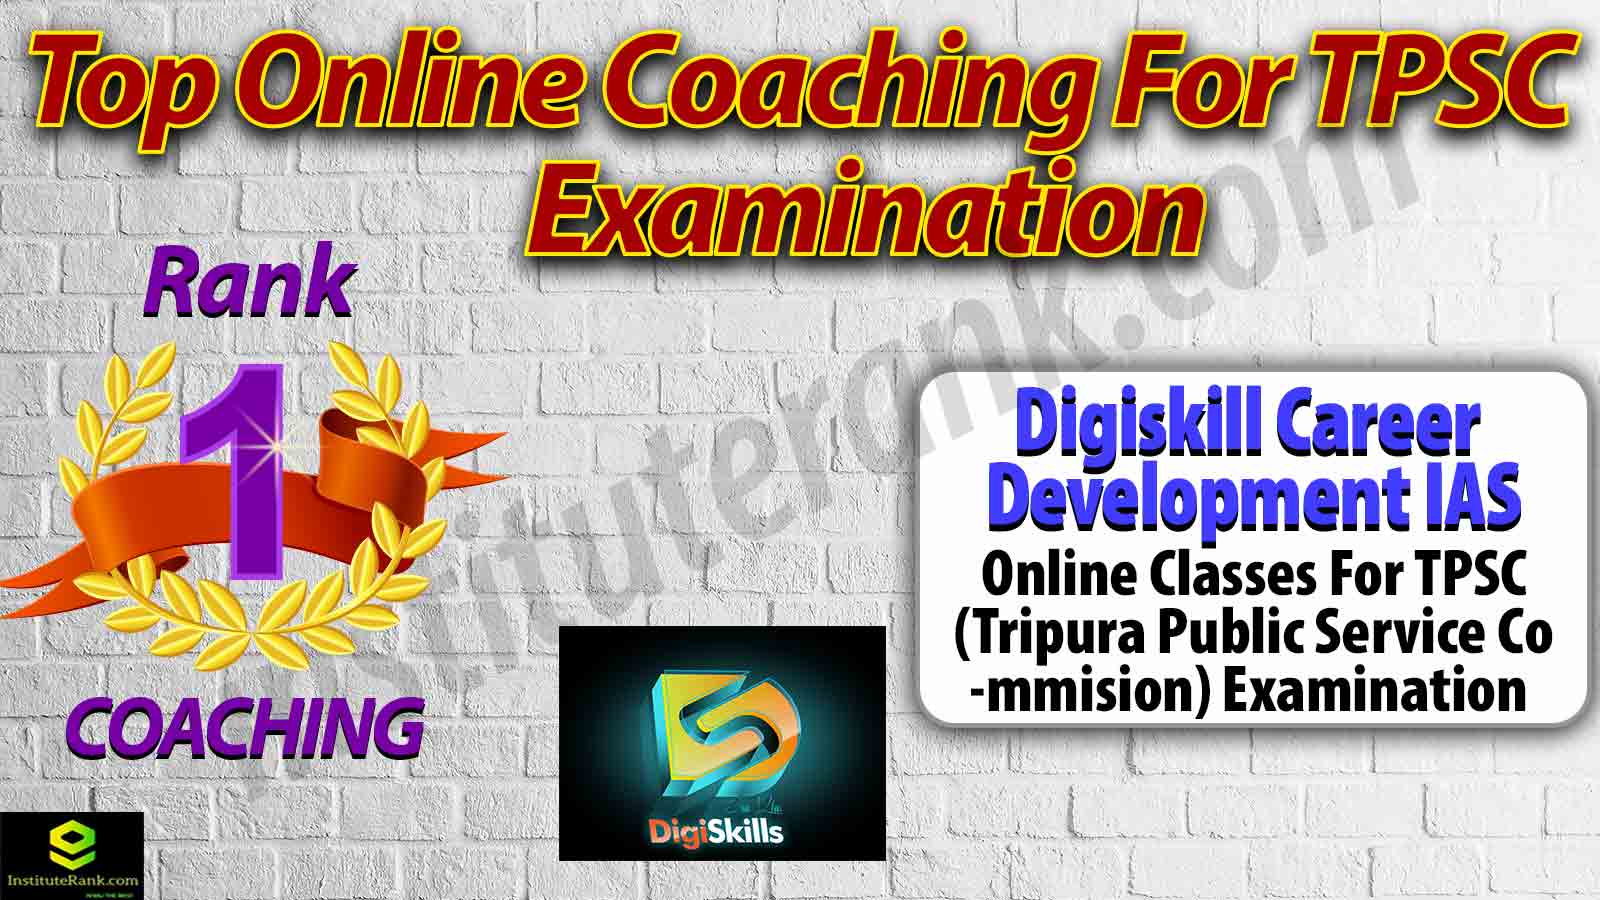 Best Online Coaching for TPSC Examination